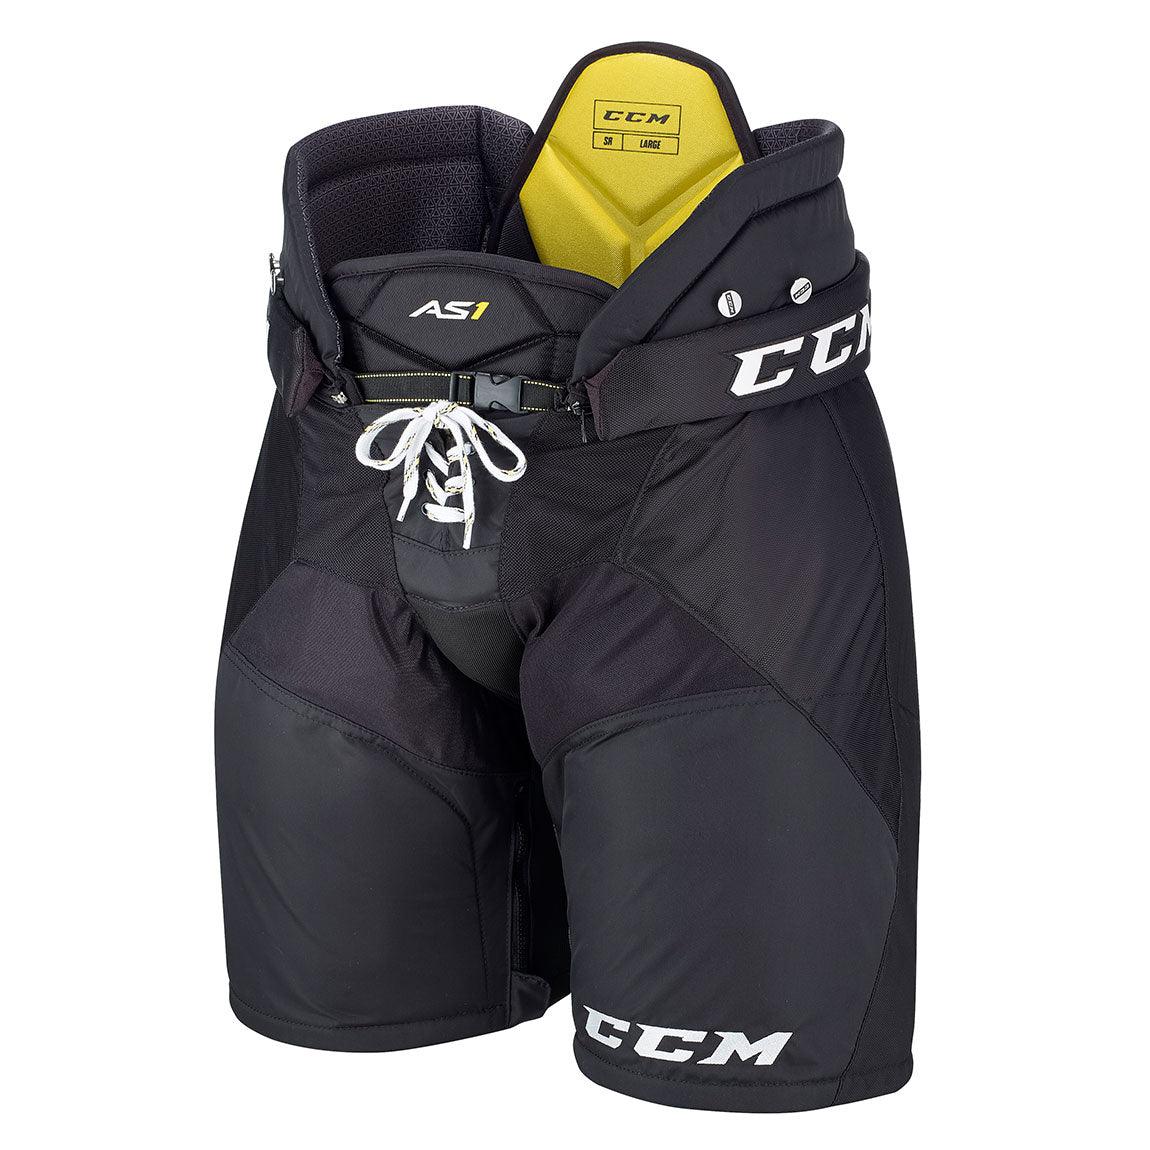 Super Tacks AS1 Hockey Pants - Junior - Sports Excellence